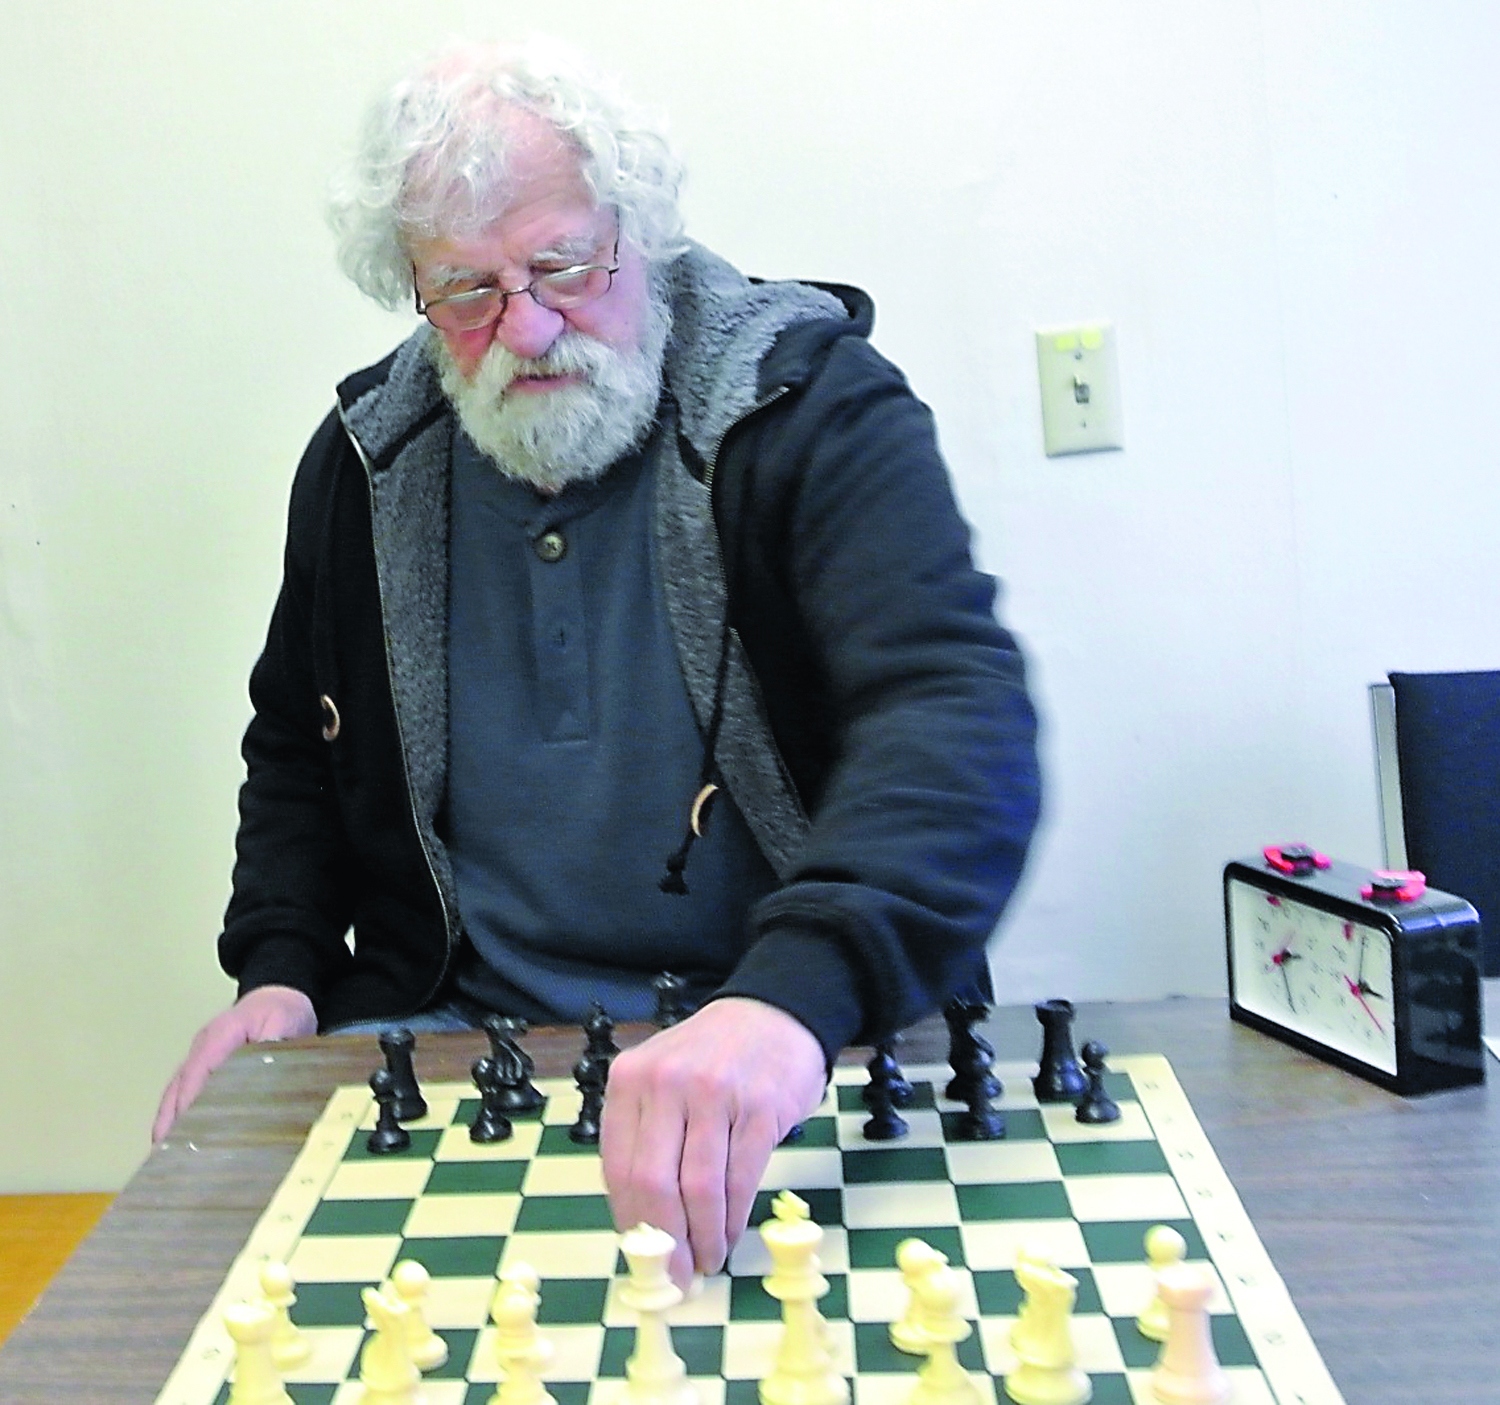 Dennis McGuire of the Last Exit on Kearney Chess Club demonstrates some moves that could be used in the annual tournament that begins this week. Prizes will be paid out to the top 10 participants. Charlie Bermant/Peninsula Daily News